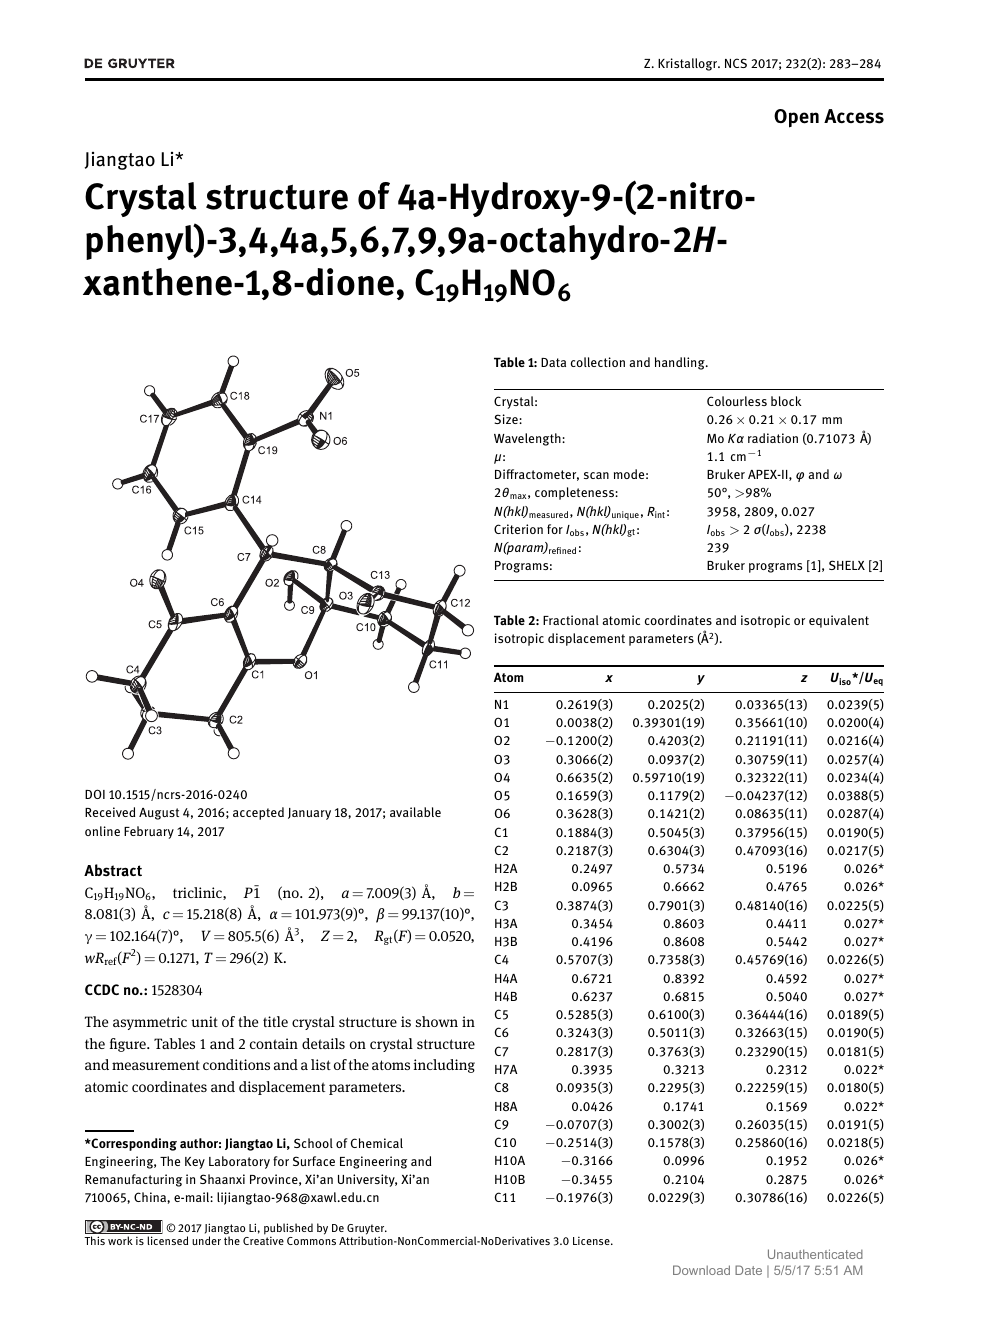 Crystal Structure Of 4a Hydroxy 9 2 Nitro Phenyl 3 4 4a 5 6 7 9 9a Octahydro 2h Xanthene 1 8 Dione C19h19no6 Topic Of Research Paper In Chemical Sciences Download Scholarly Article Pdf And Read For Free On Cyberleninka Open Science Hub